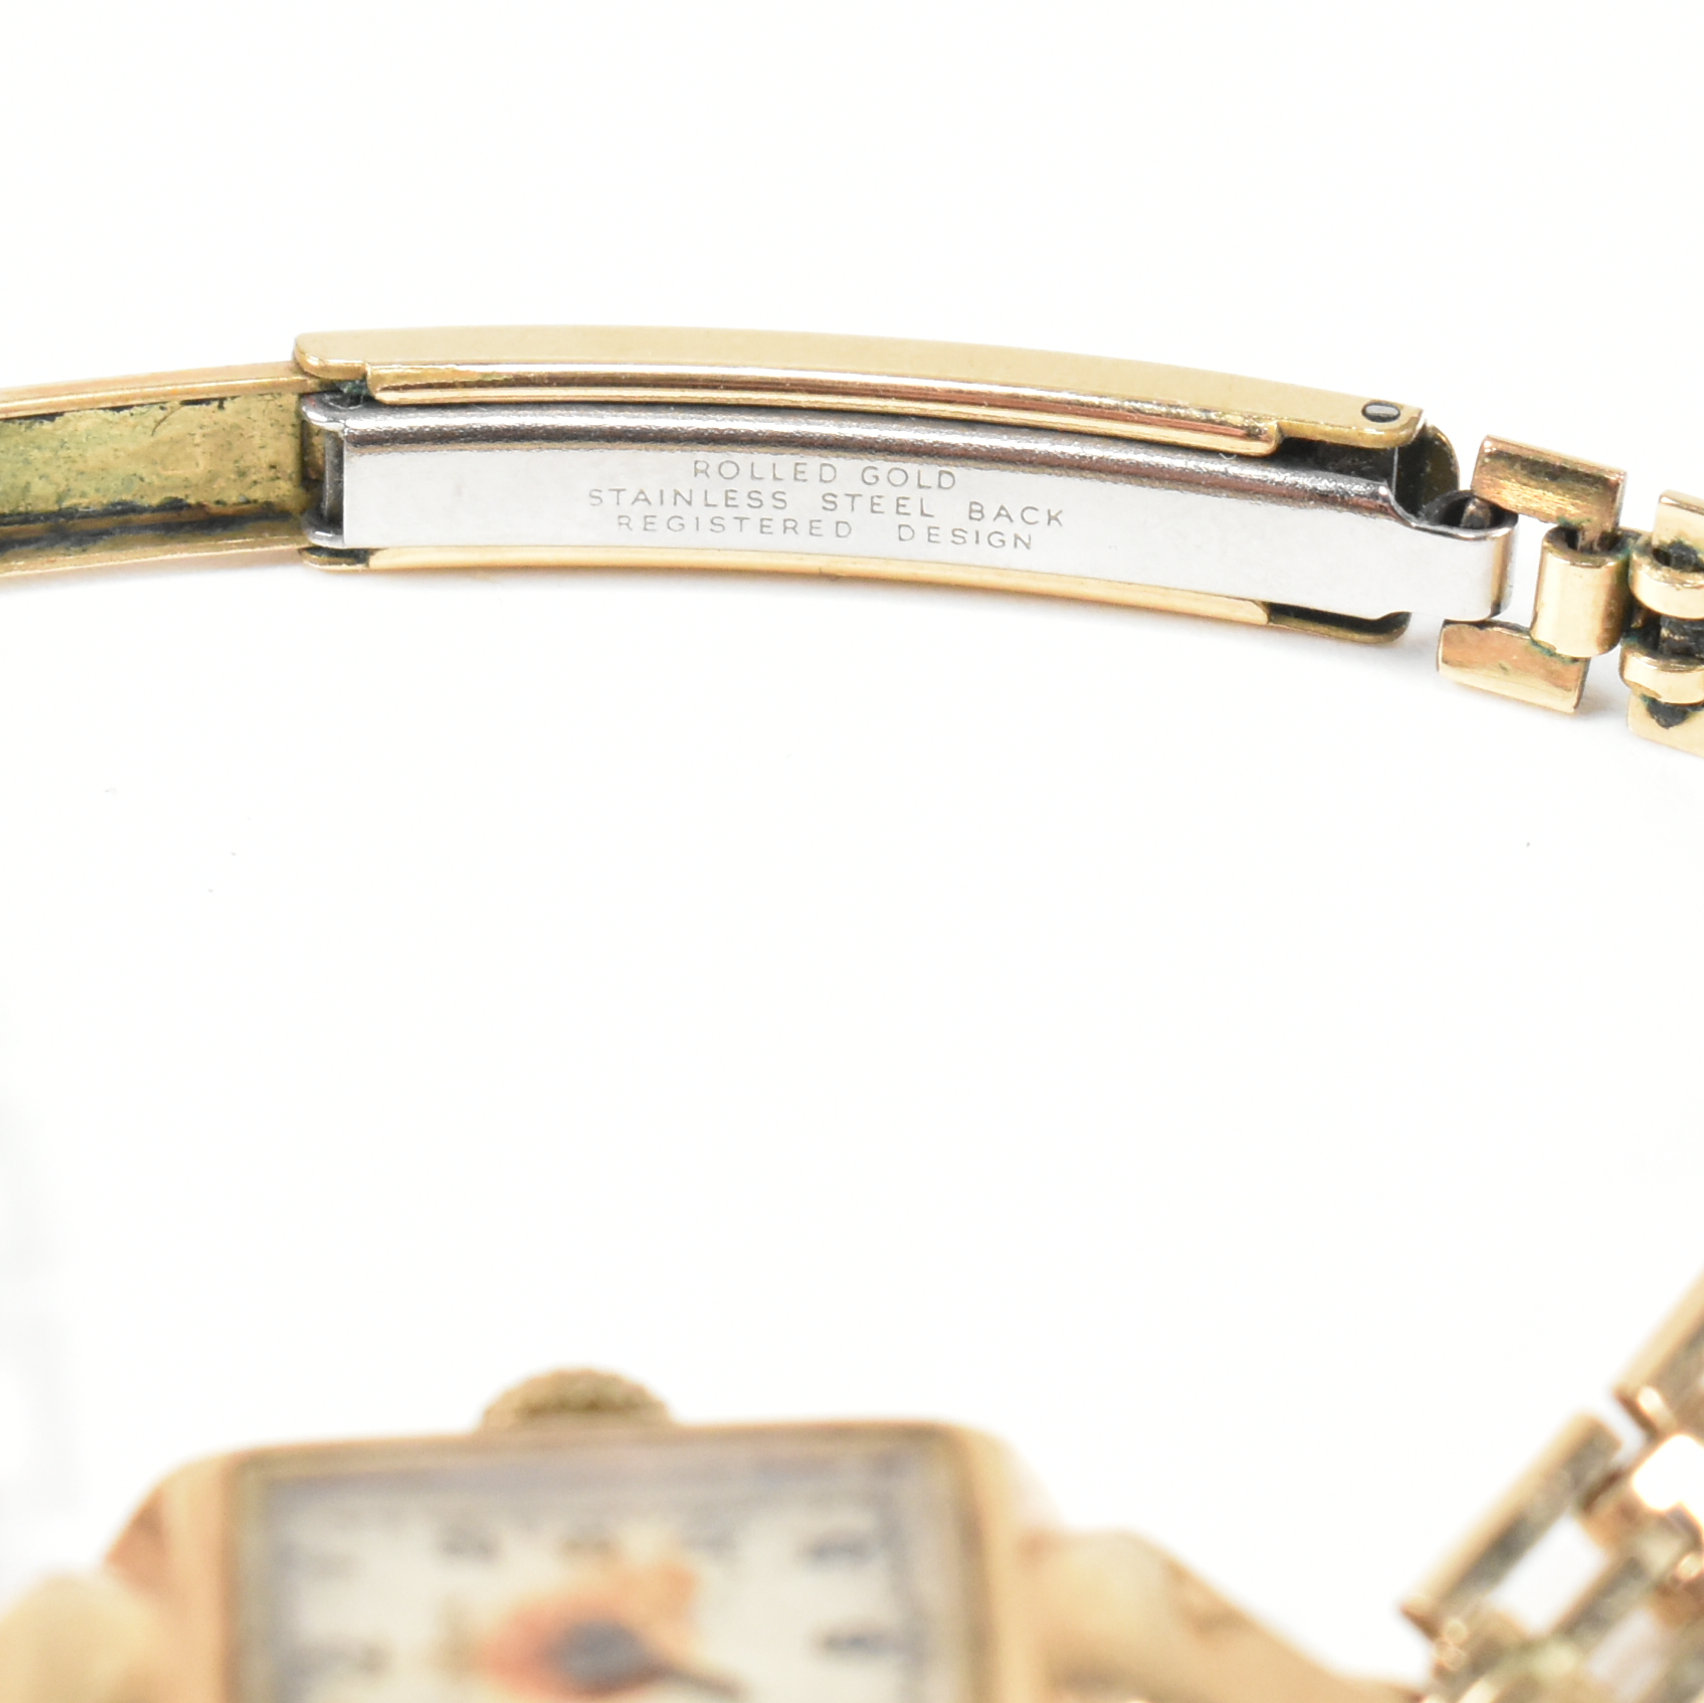 HALLMARKED 9CT GOLD AUDAX LADIES DRESS WATCH WITH ROLLED GOLD BRACELET - Image 6 of 7